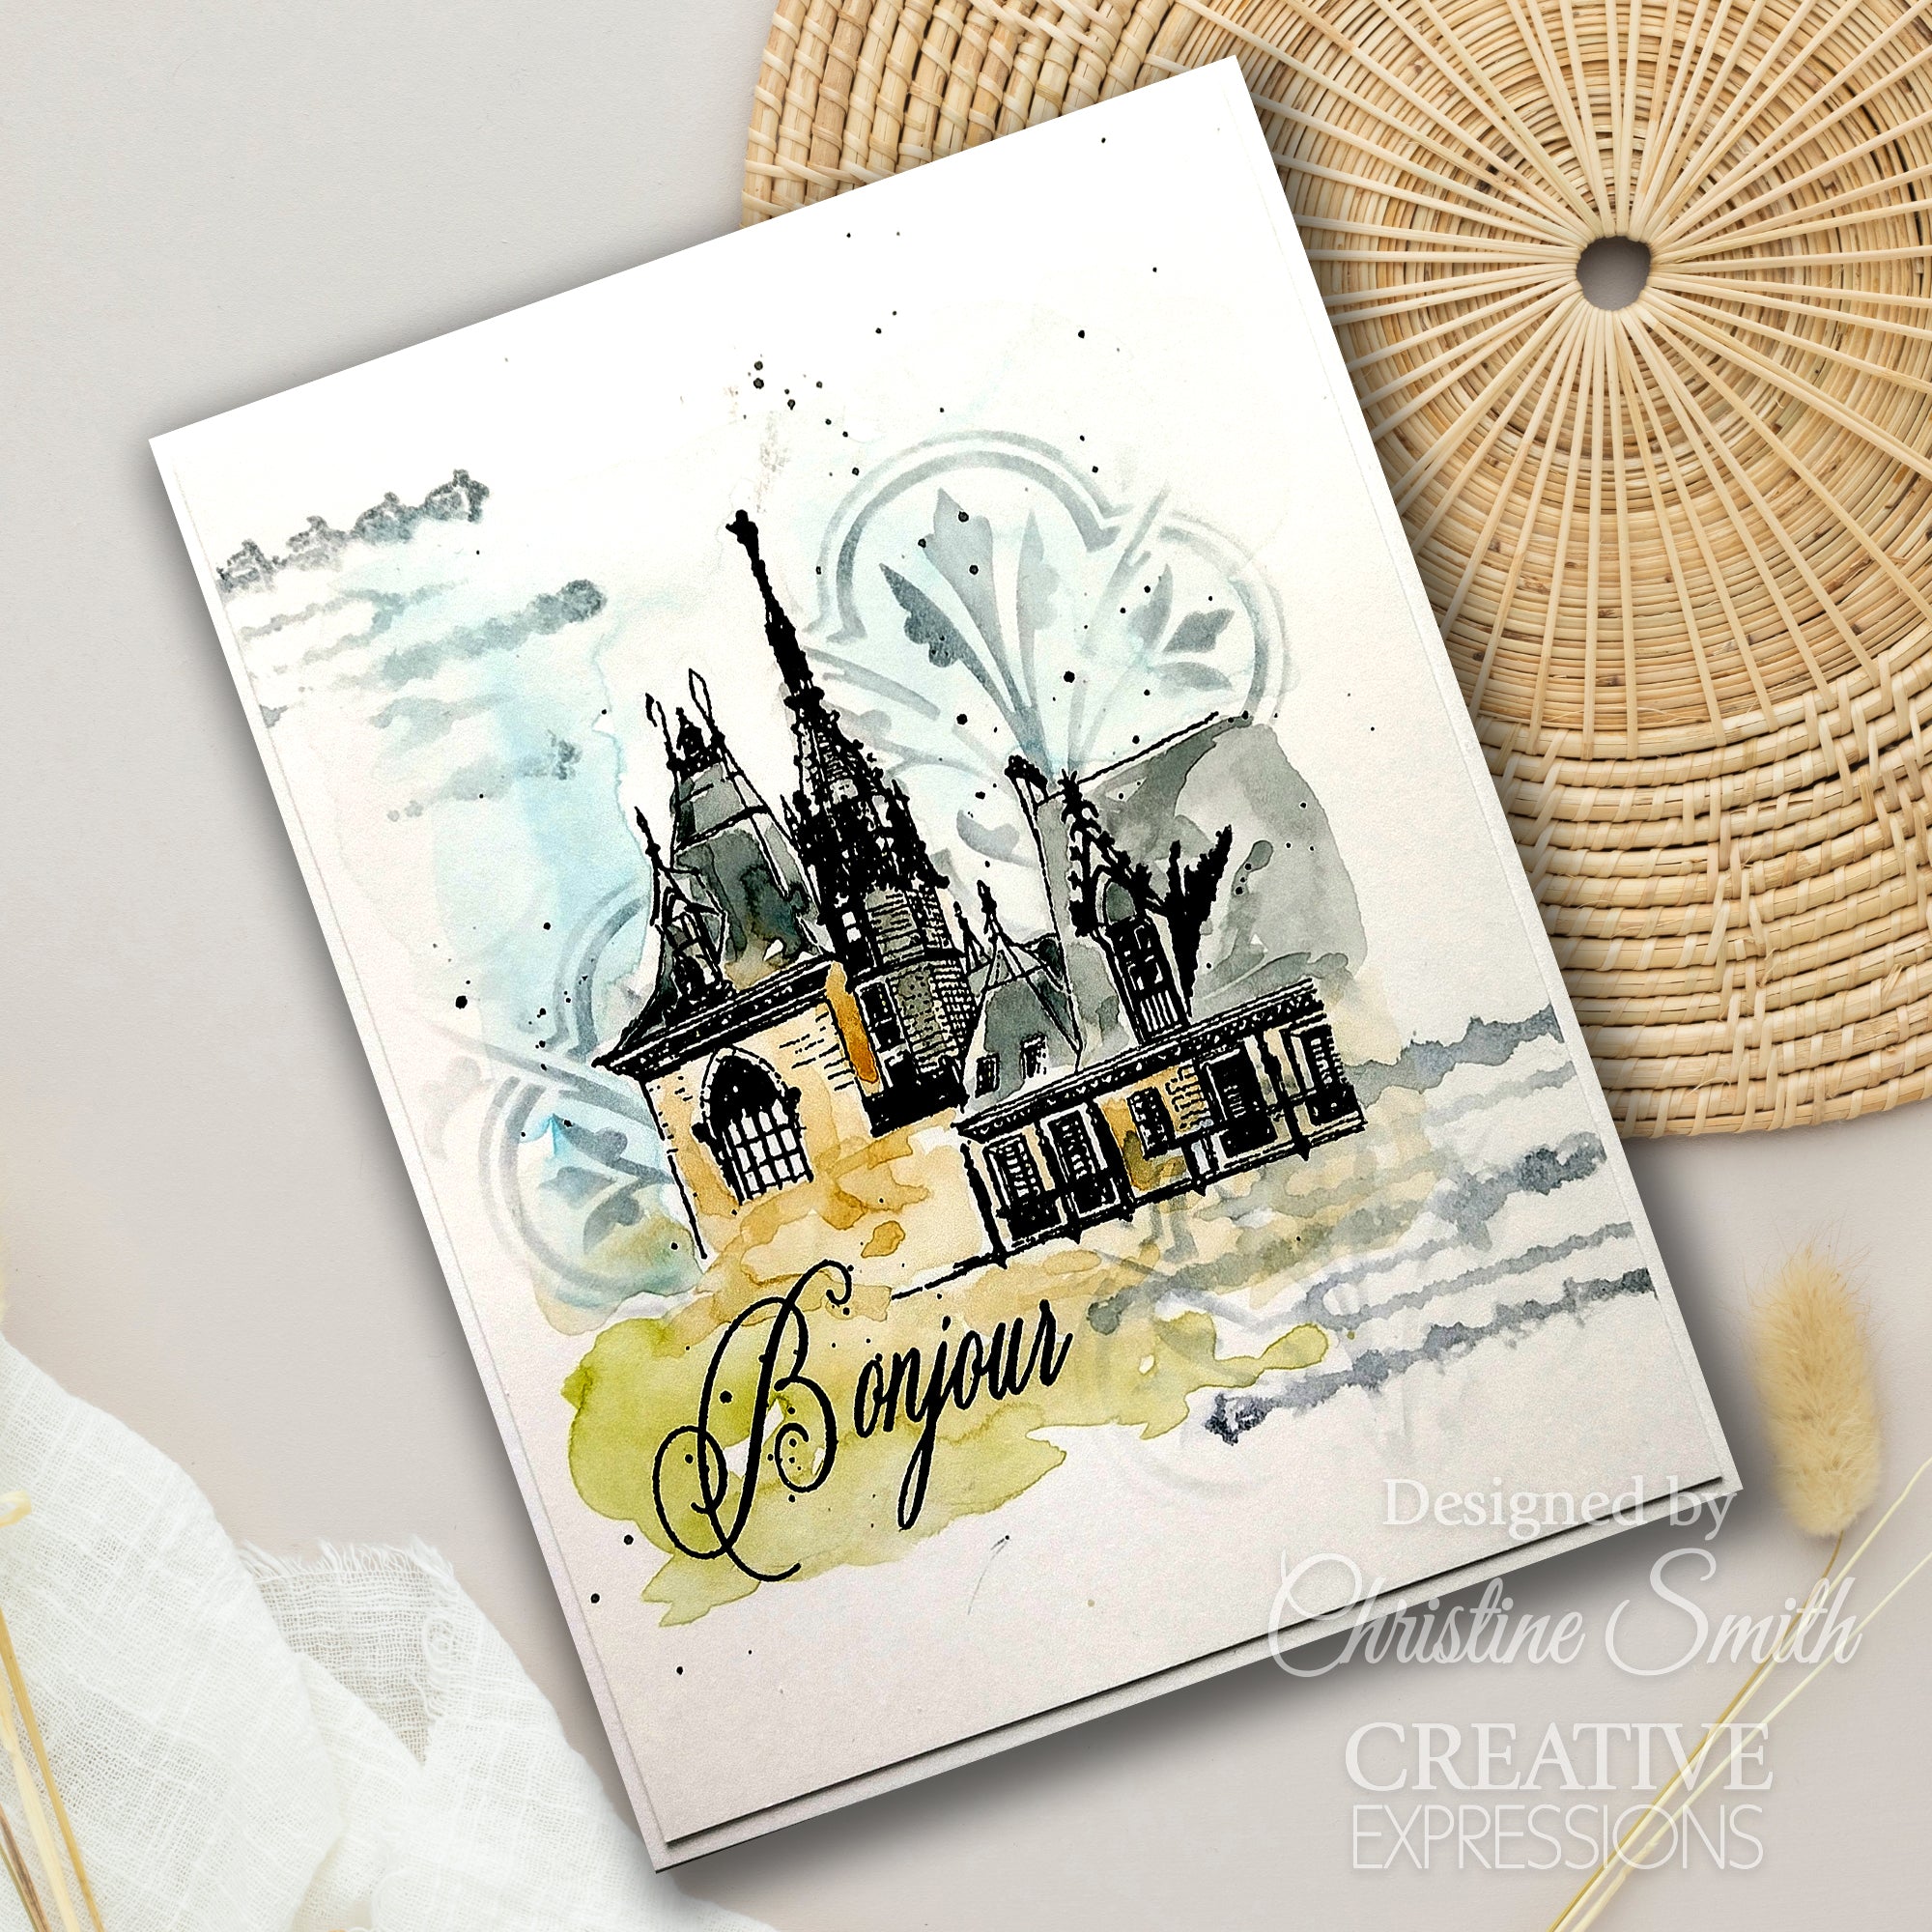 Creative Expressions Taylor Made Journals Fleur-de-lis Elegance 6 in x 8 in Stencil